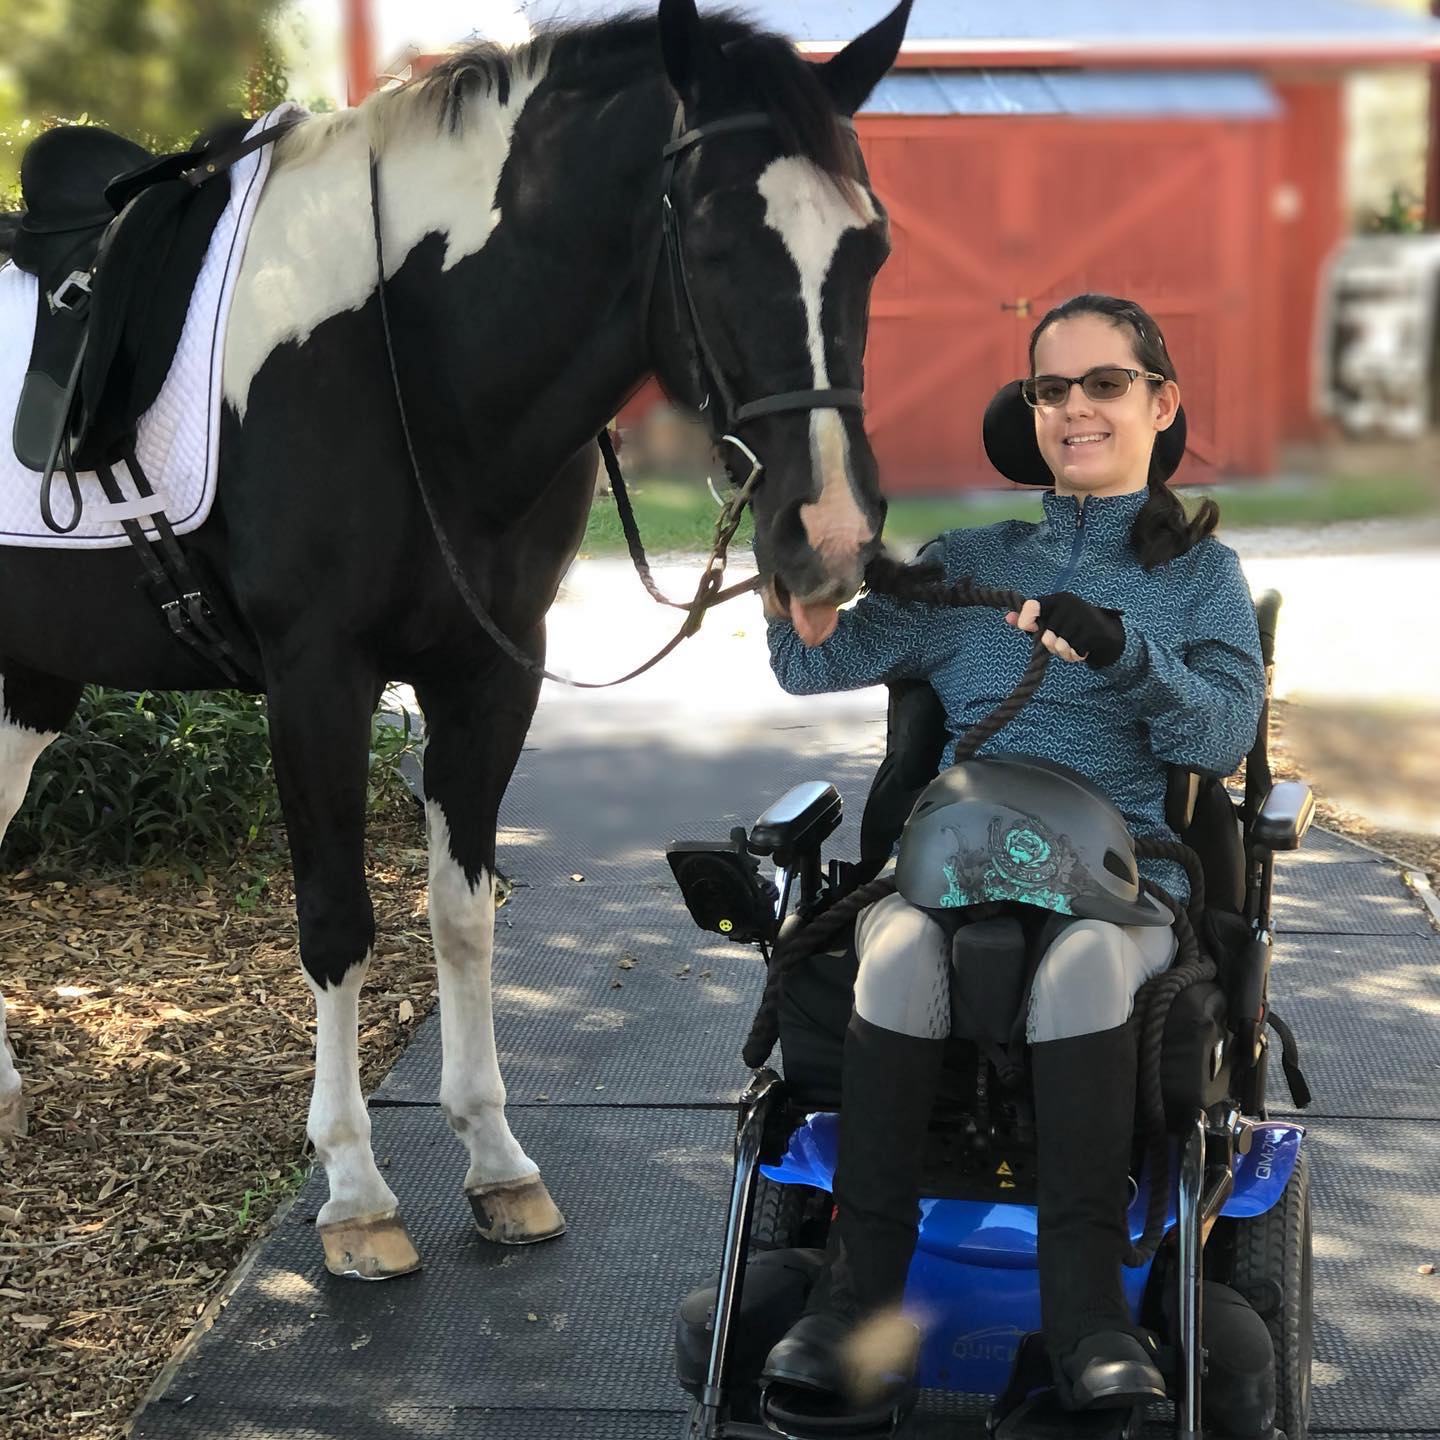 Female athlete in a wheelchair smiling at the camera and holding a lead rope with a horse posed beside her